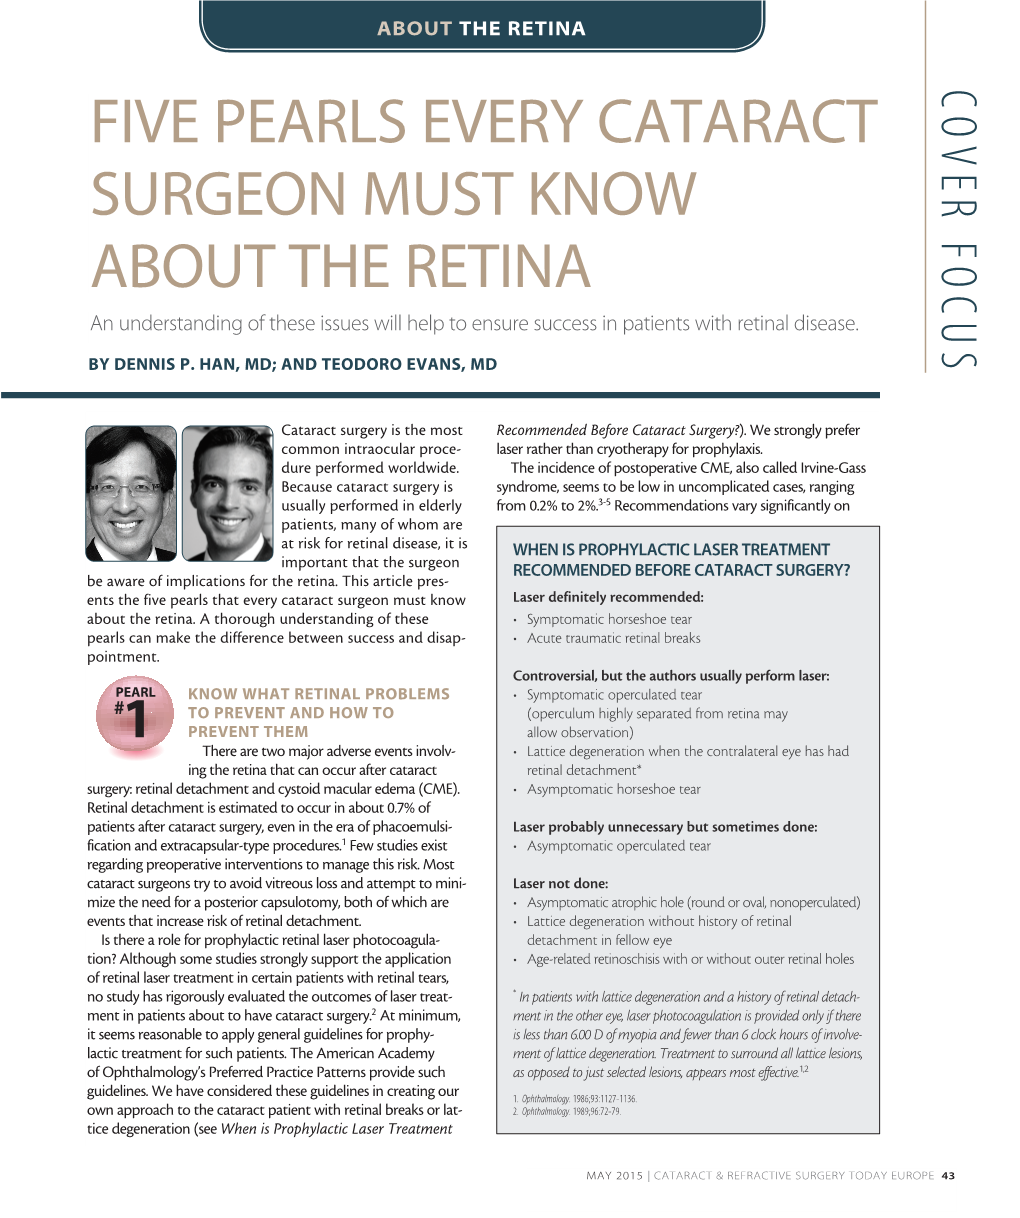 FIVE PEARLS EVERY CATARACT SURGEON MUST KNOW ABOUT the RETINA an Understanding of These Issues Will Help to Ensure Success in Patients with Retinal Disease